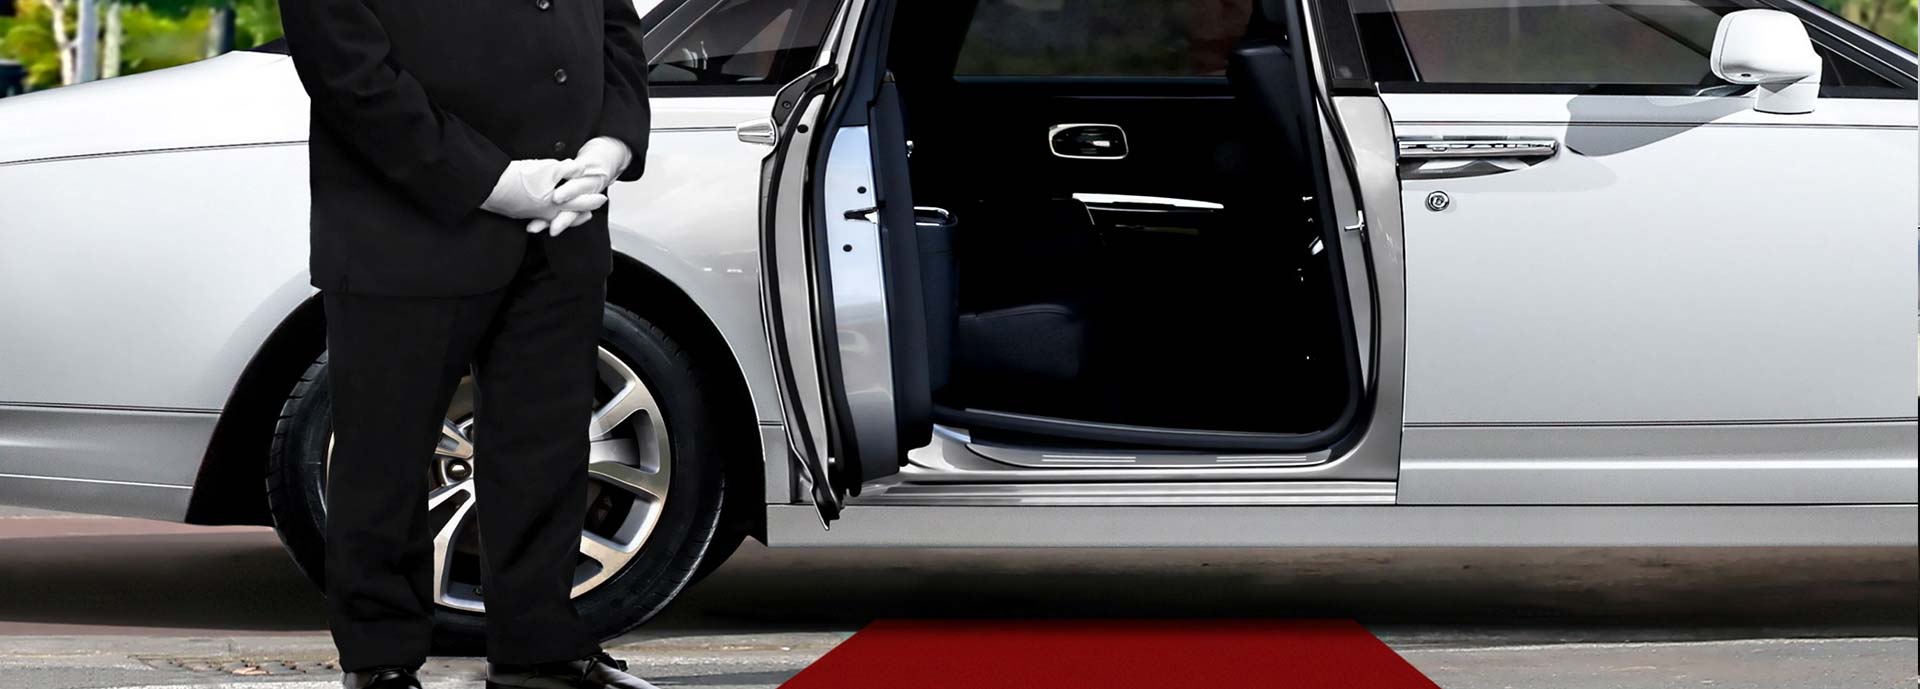 Executive Chauffeur services in Chicago